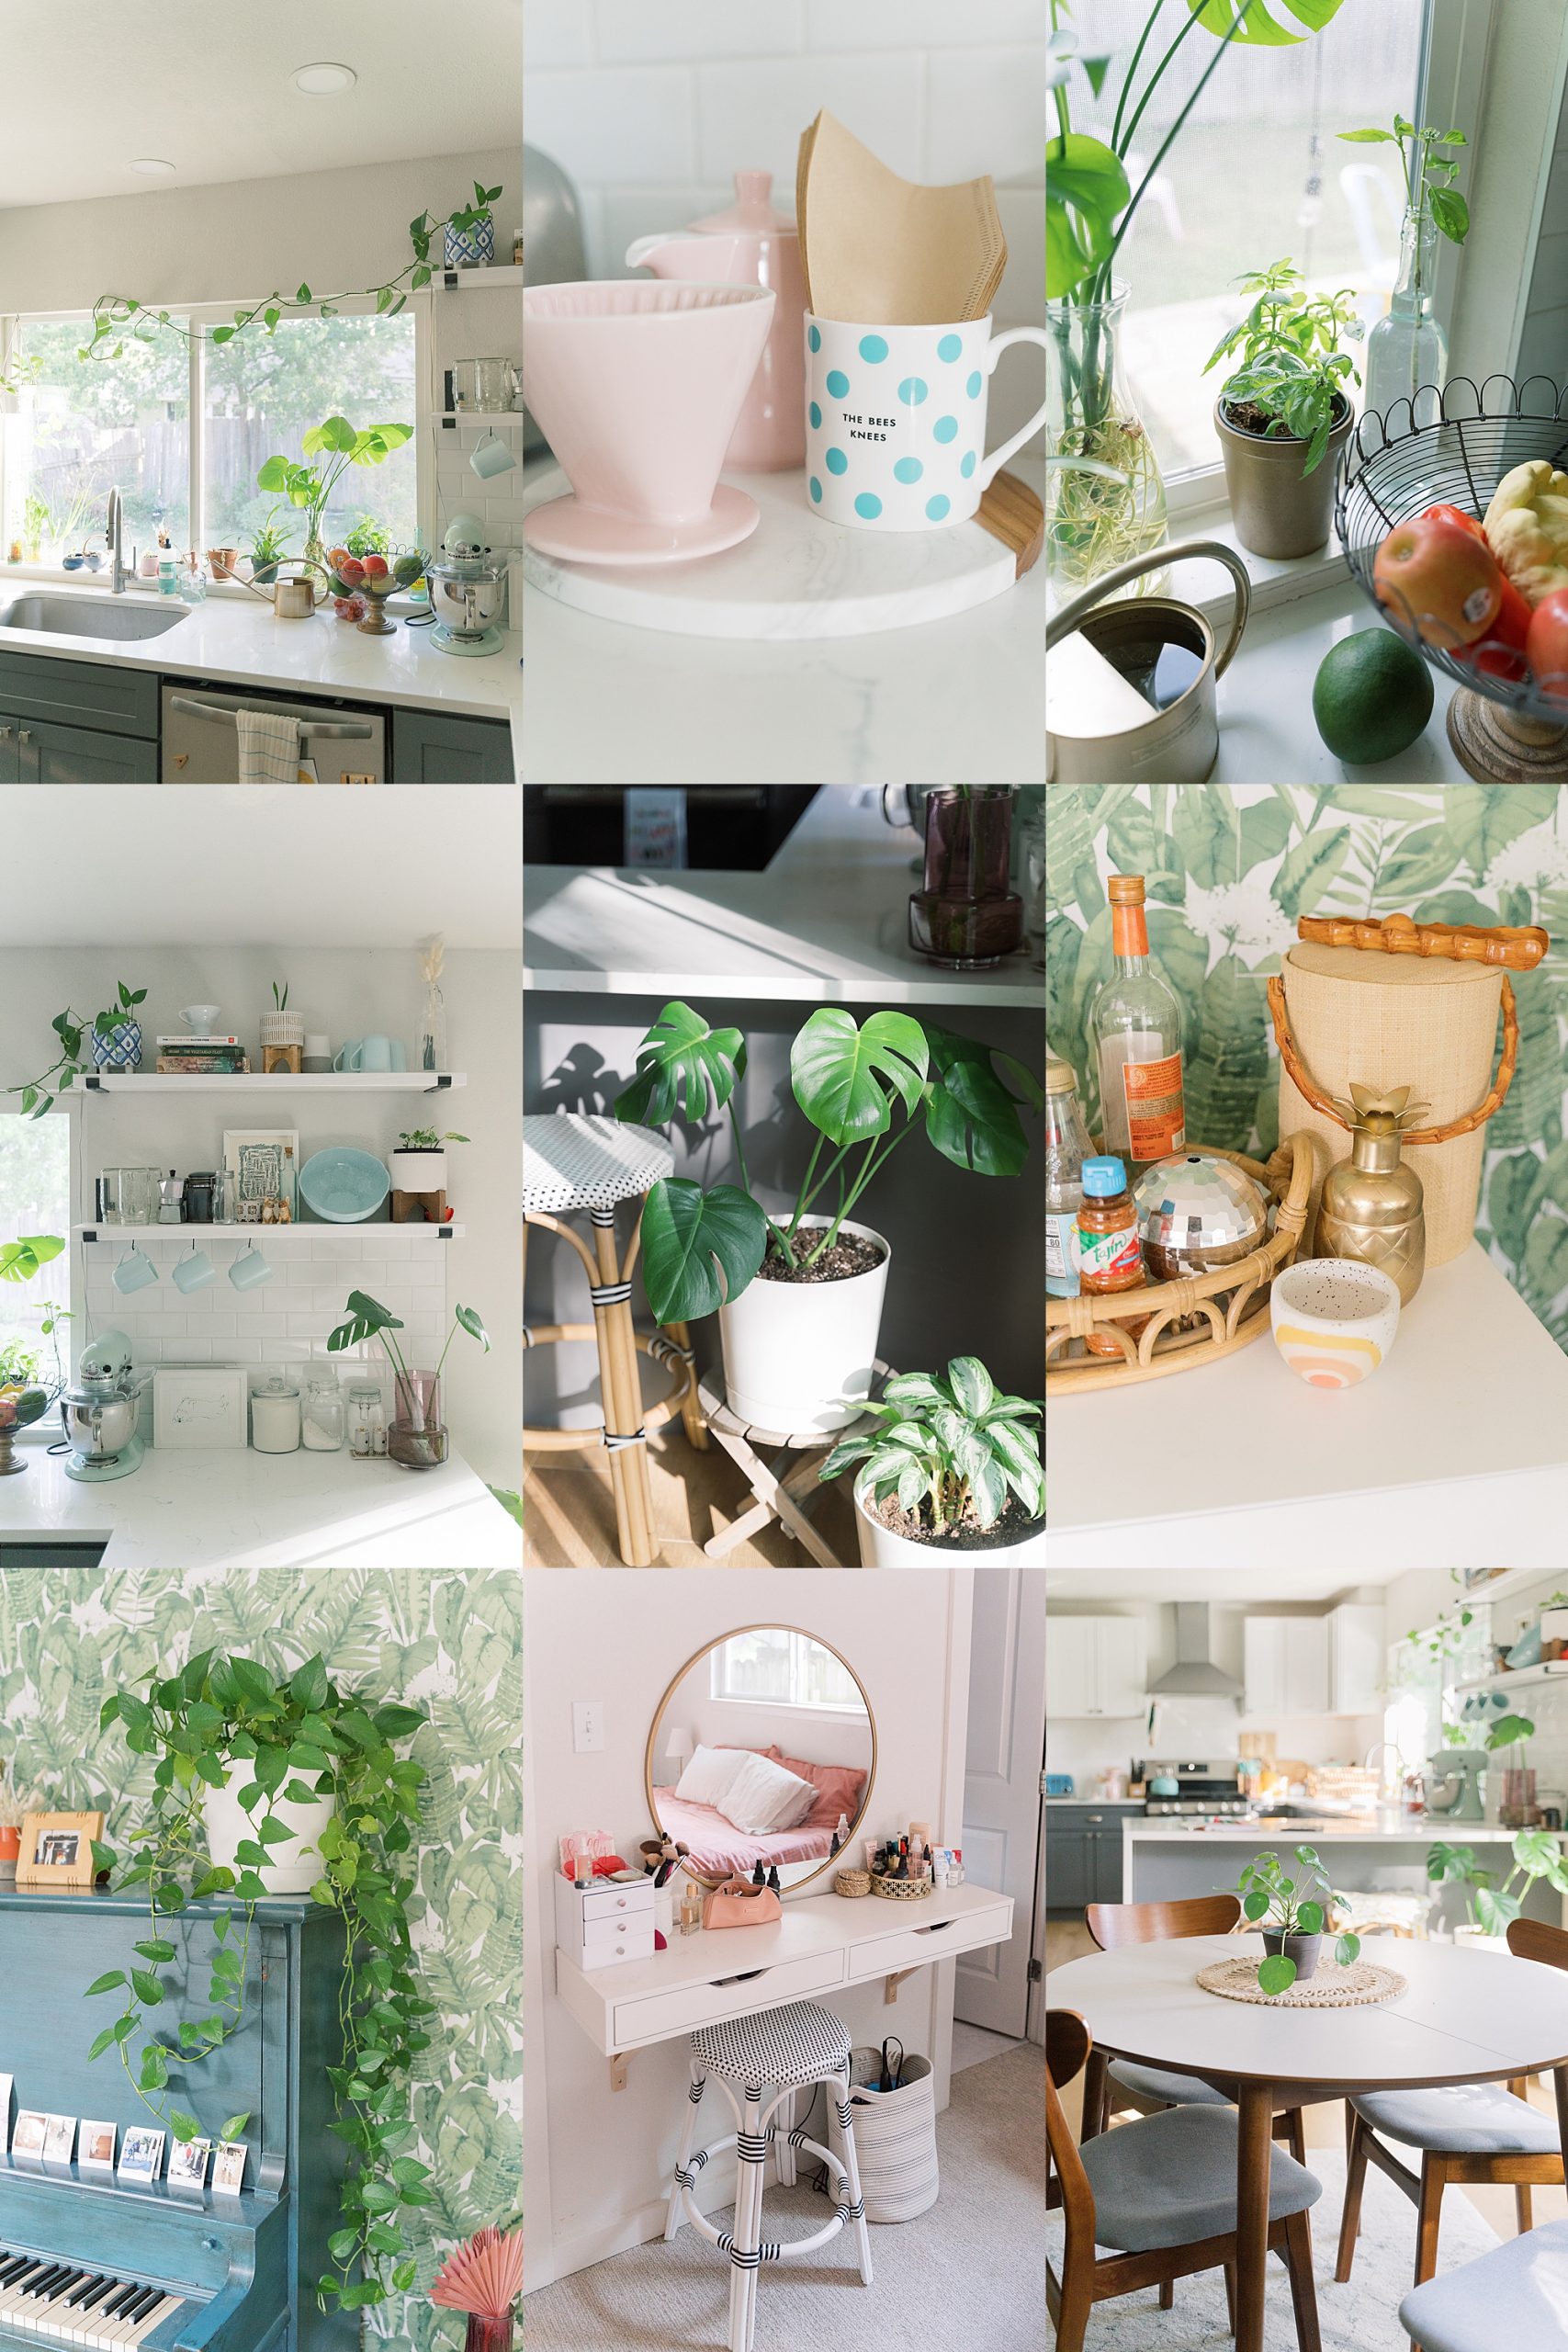 Come take a look inside our South Austin home! A mix of eclectic, fun, colorful, bright, and soo many plants! Here's our latest house update featuring all the big and lil changes, and what's to come. Wish you were here! #hometour #atxlife